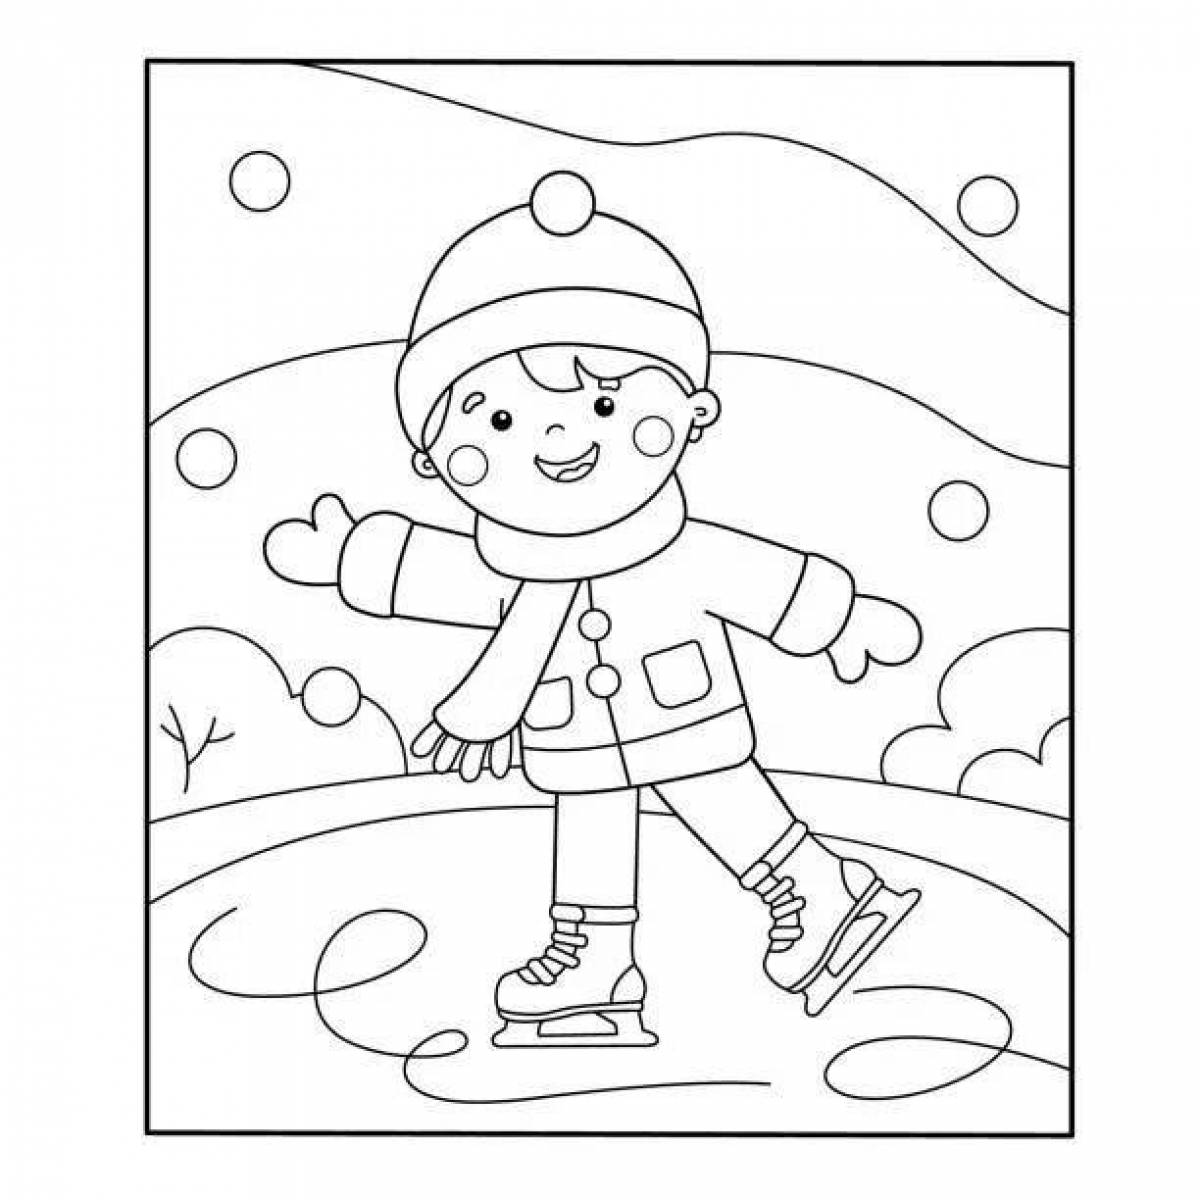 Energetic coloring book for kids winter sports